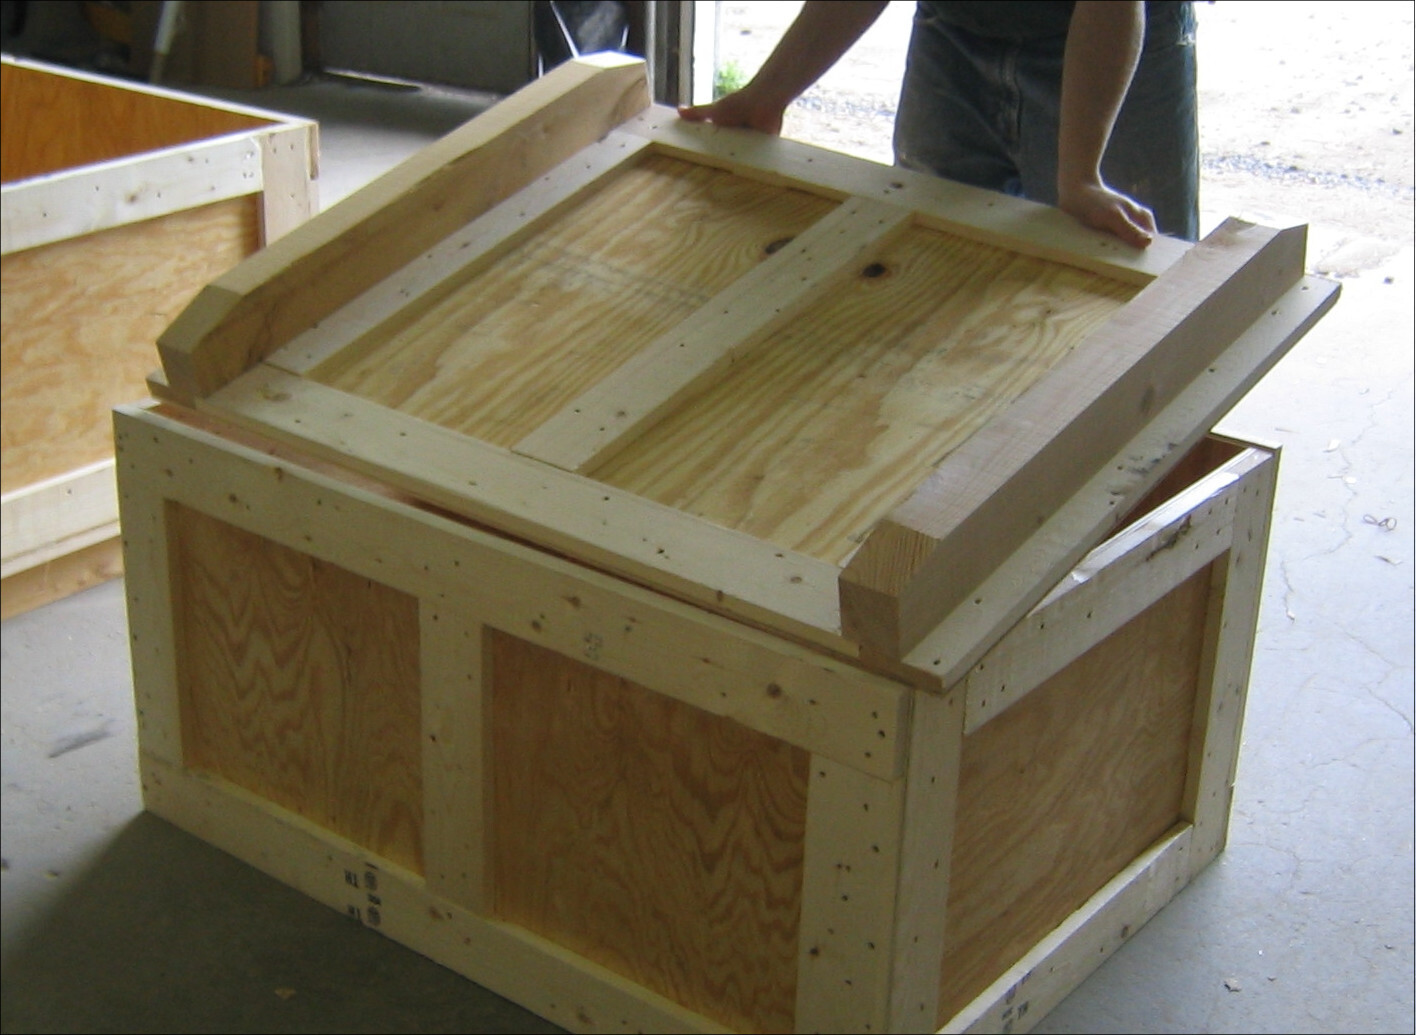 How To Build A Wooden Crate For Shipping